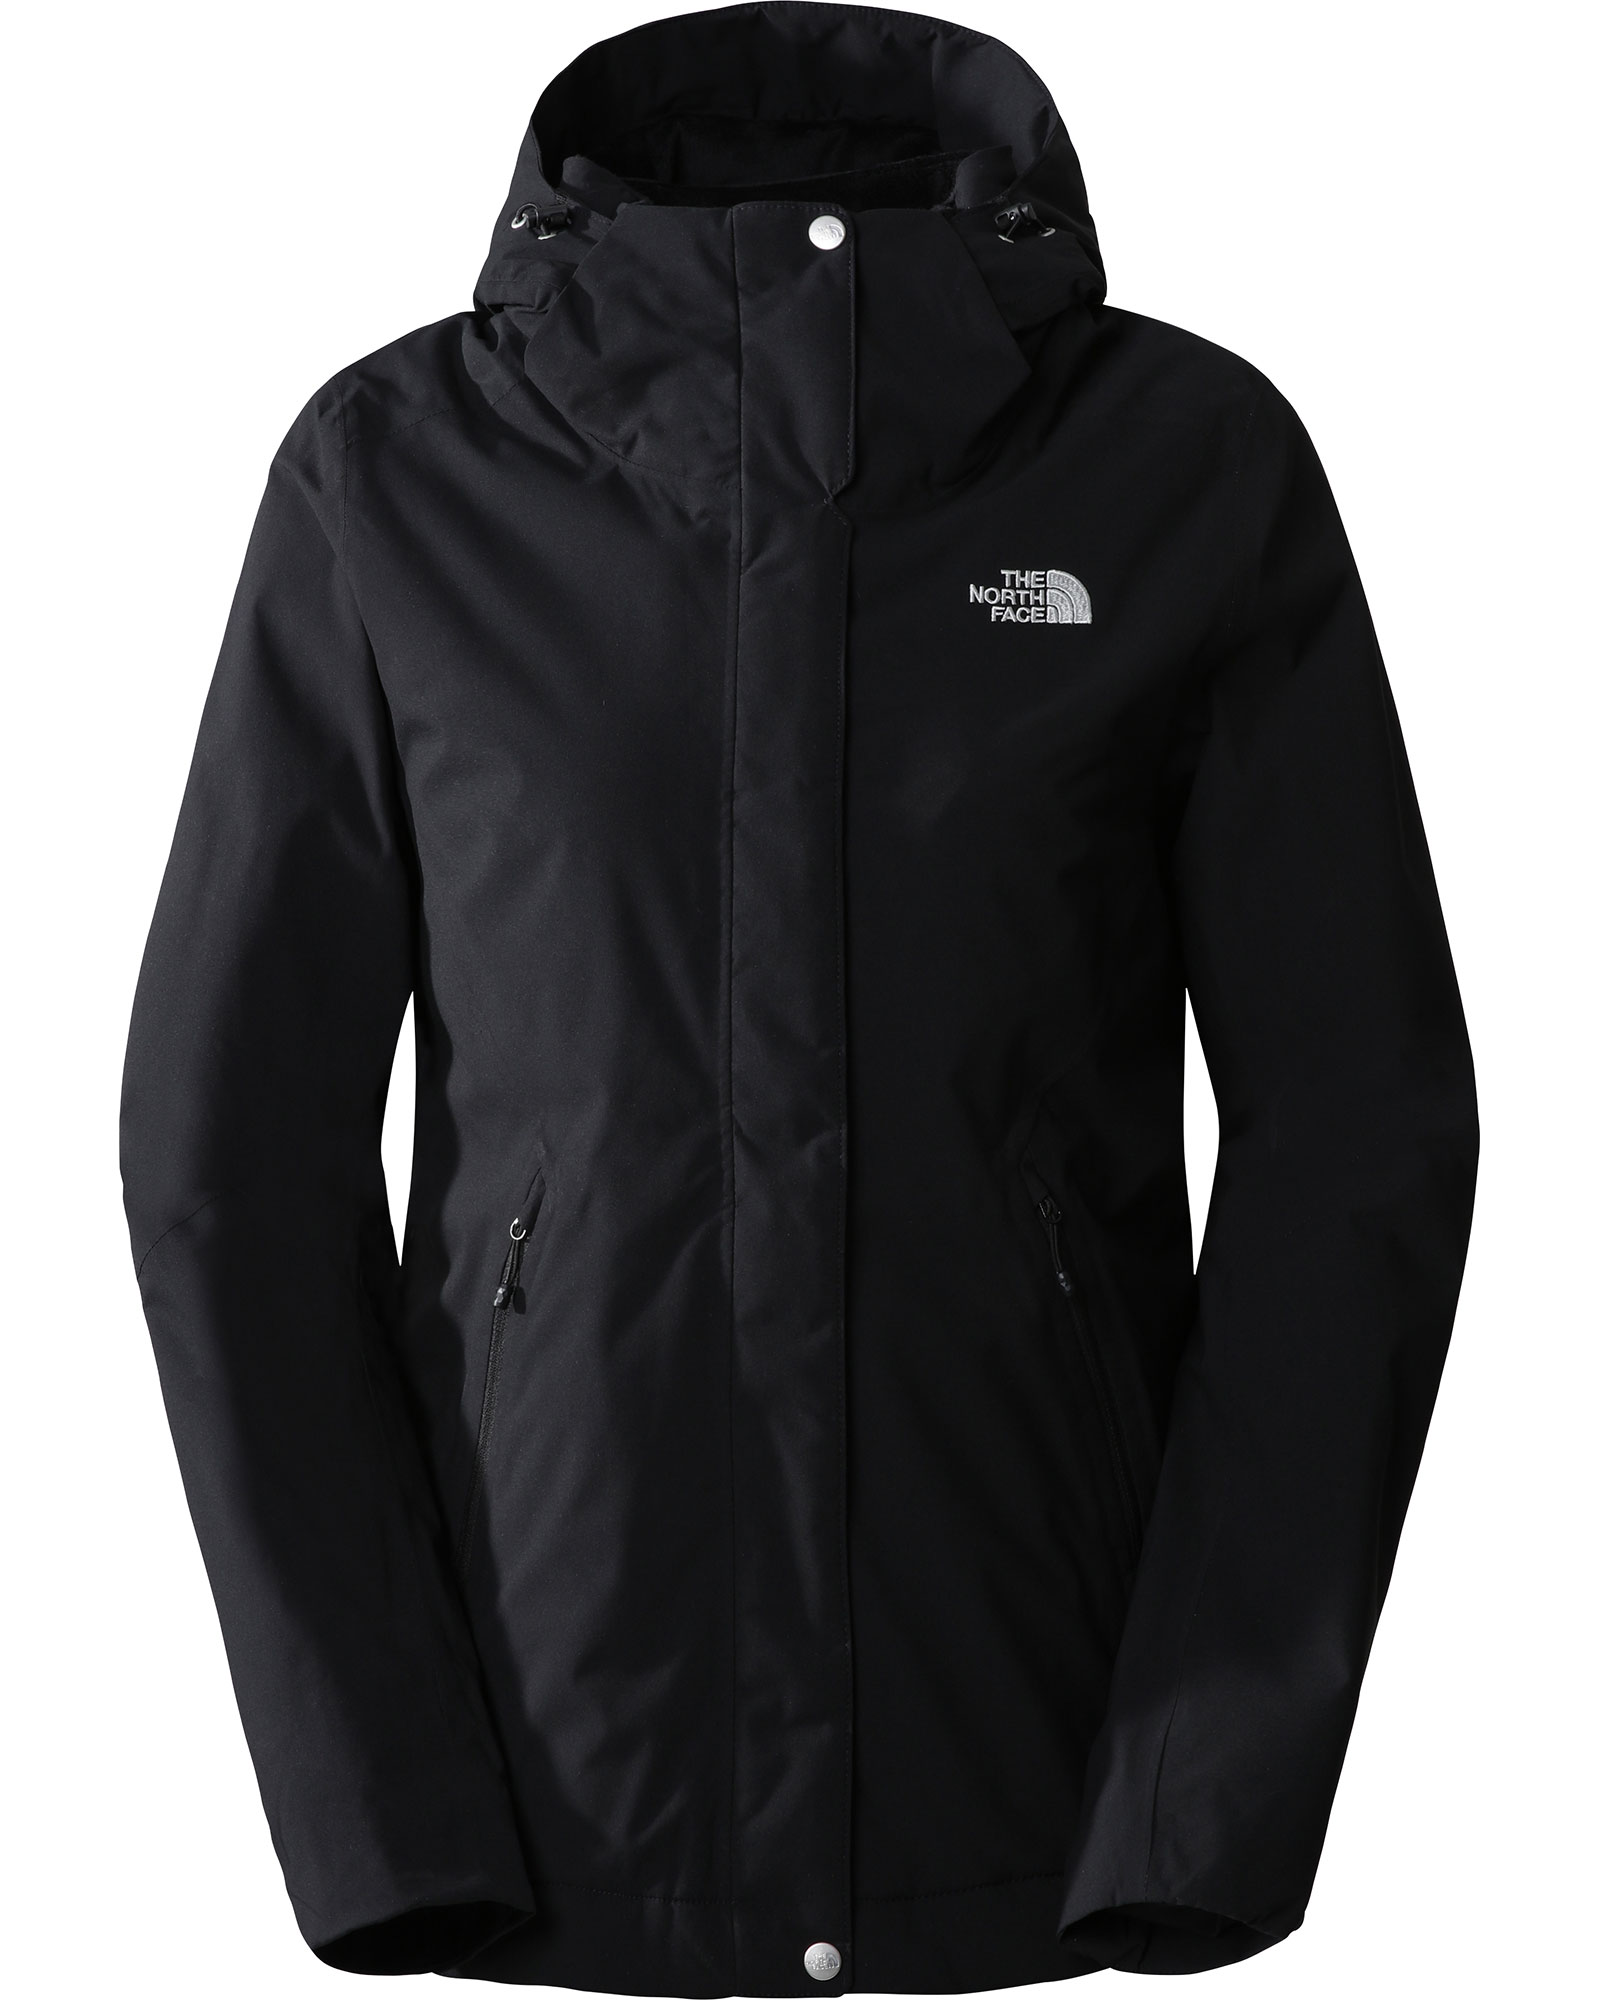 The North Face Inlux Insulated DryVent Women’s Insulated Jacket - TNF Black XS